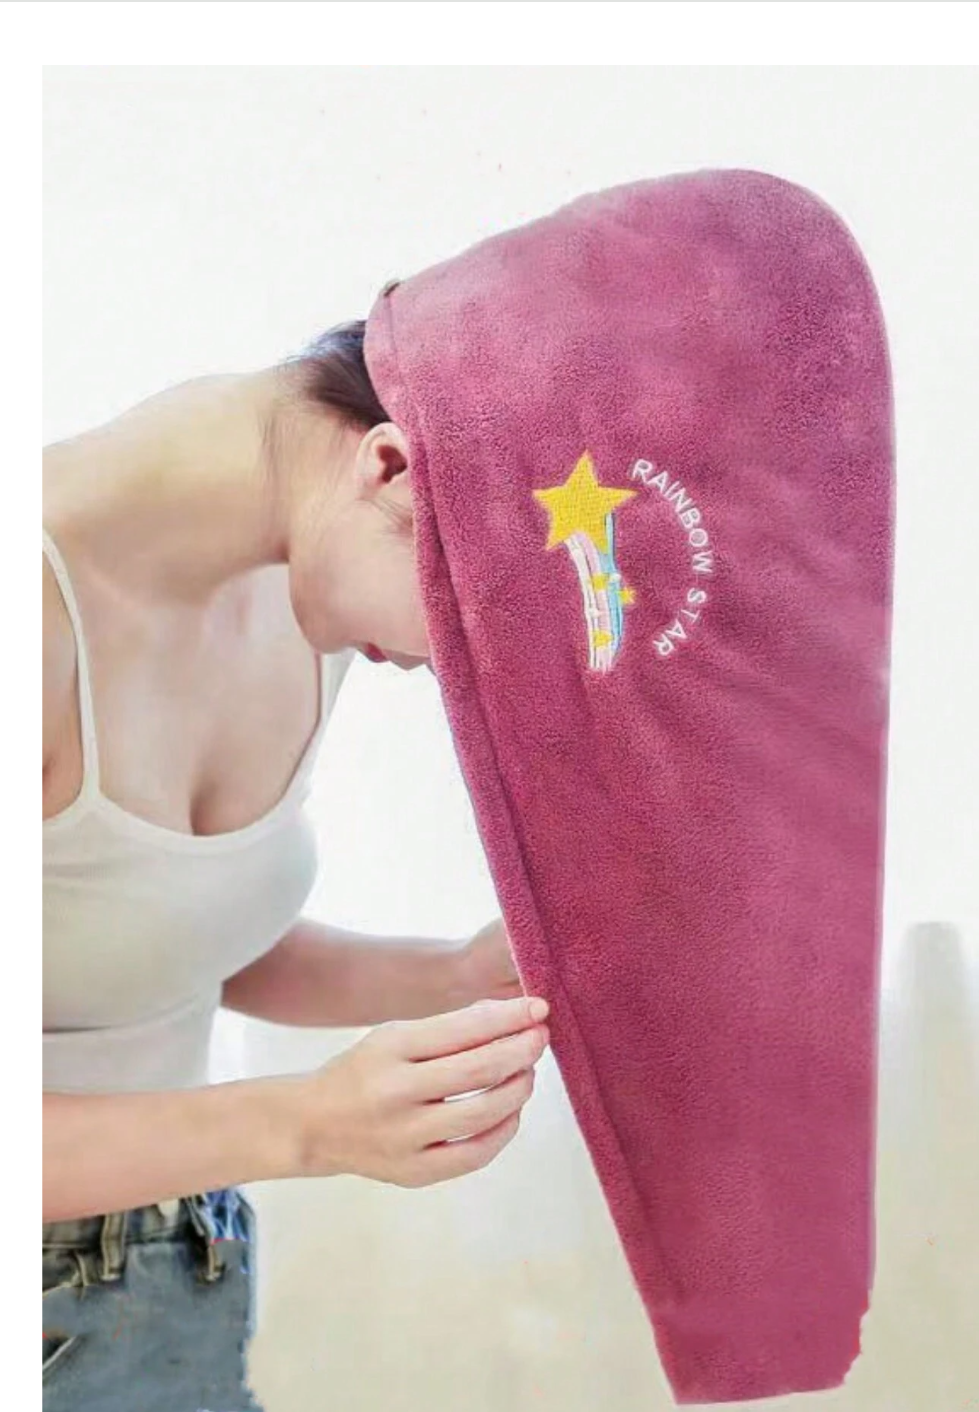 LuxeLock: 1pc Women's Shower Cap Towel - Quick Dry, Soft, and Stylish!